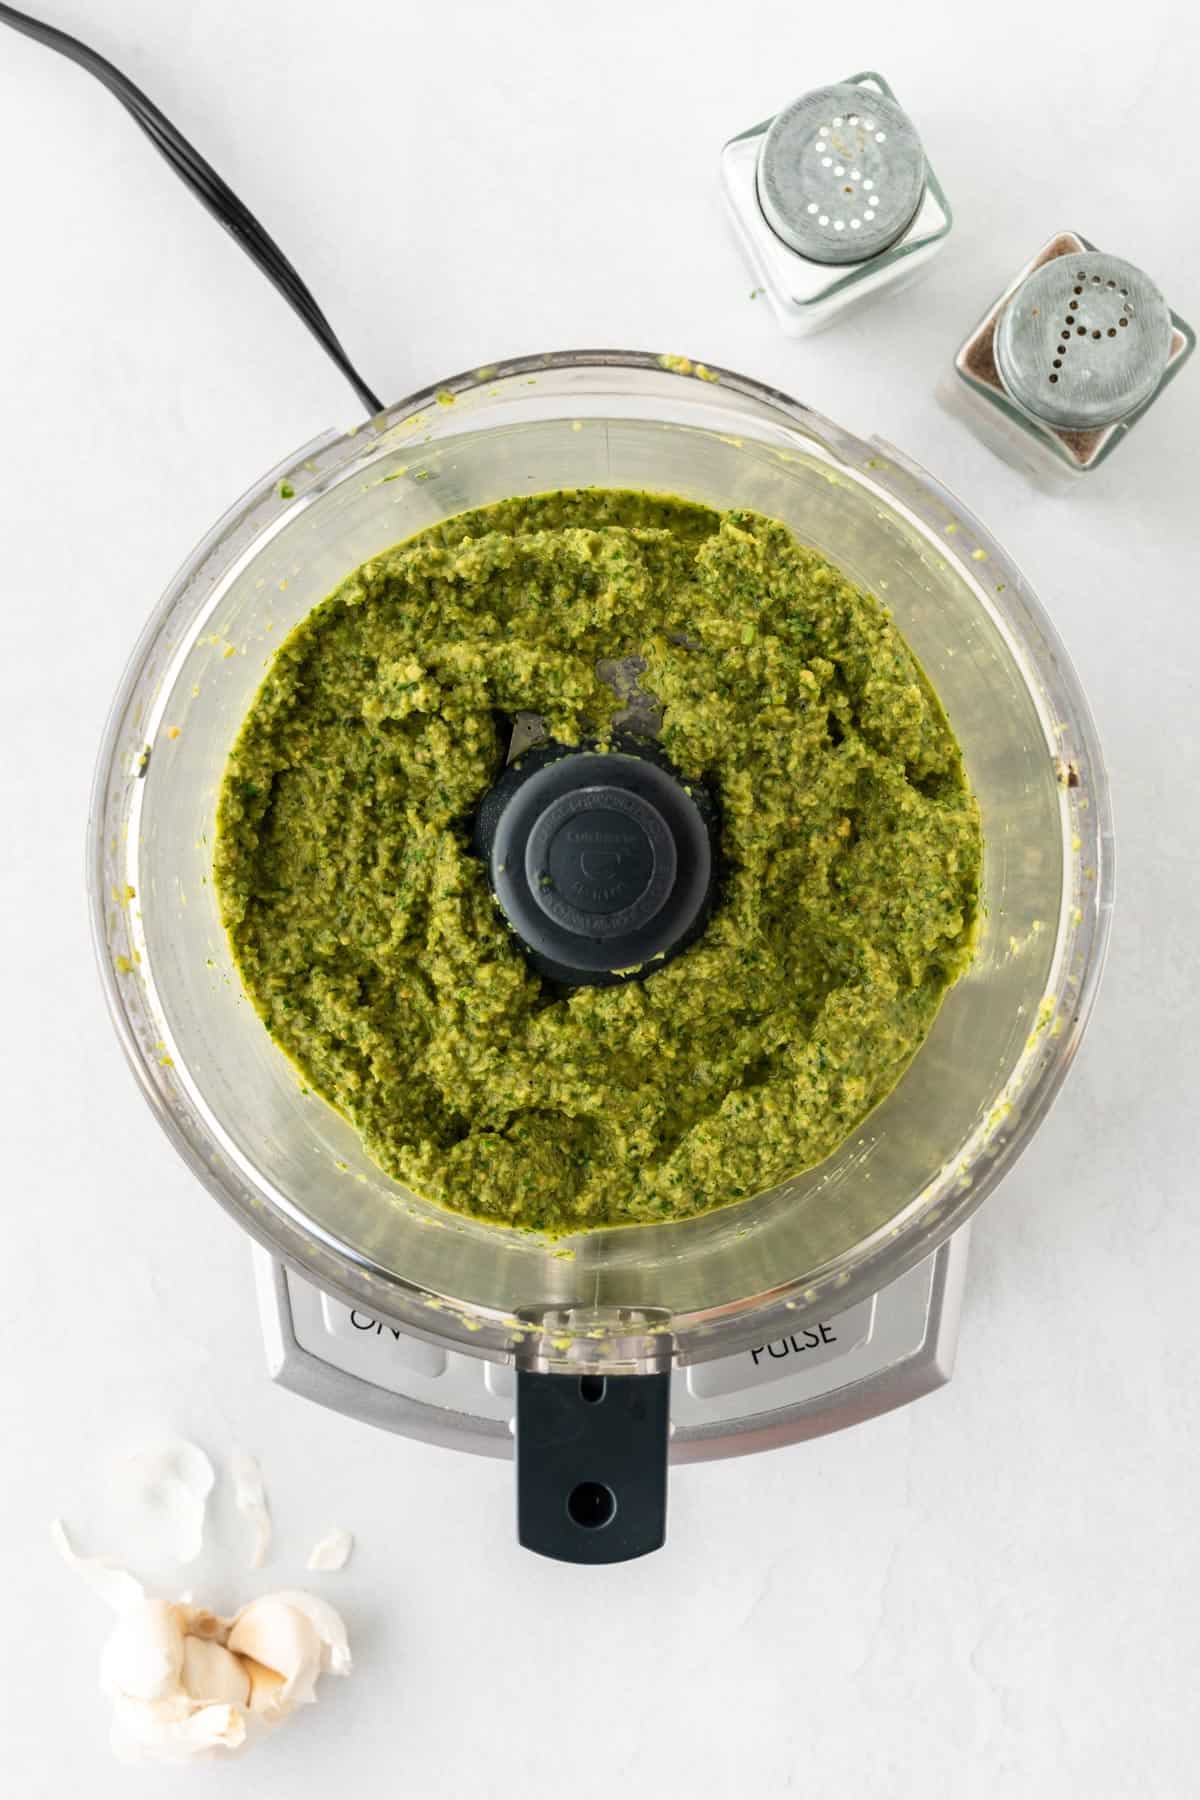 A photo of green olive sauce blended in a food processor.